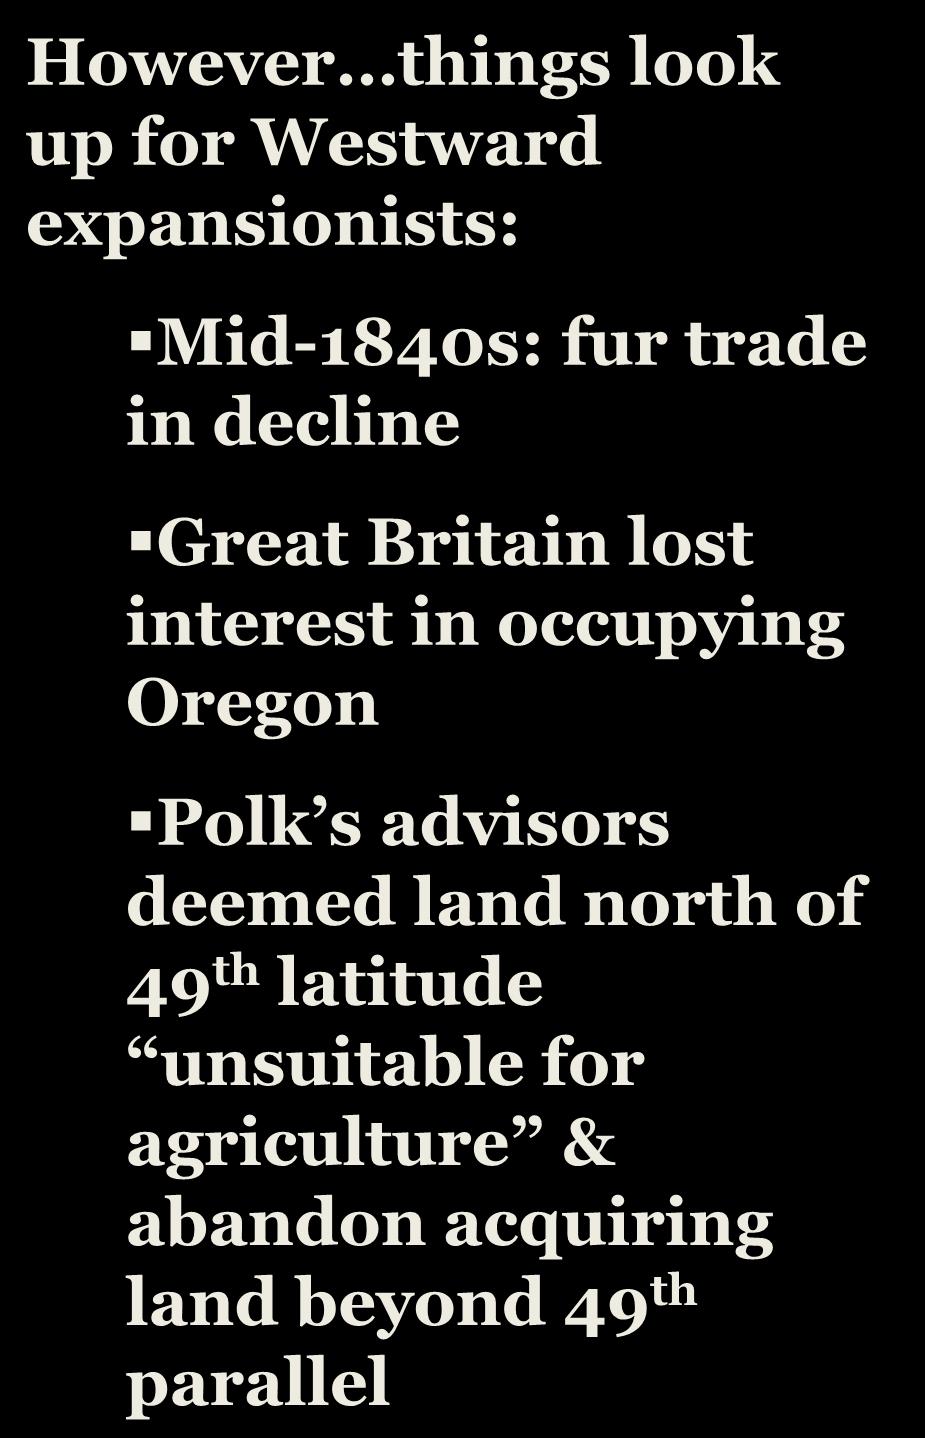 However things look up for Westward expansionists: Mid-1840s: fur trade in decline Great Britain lost interest in occupying